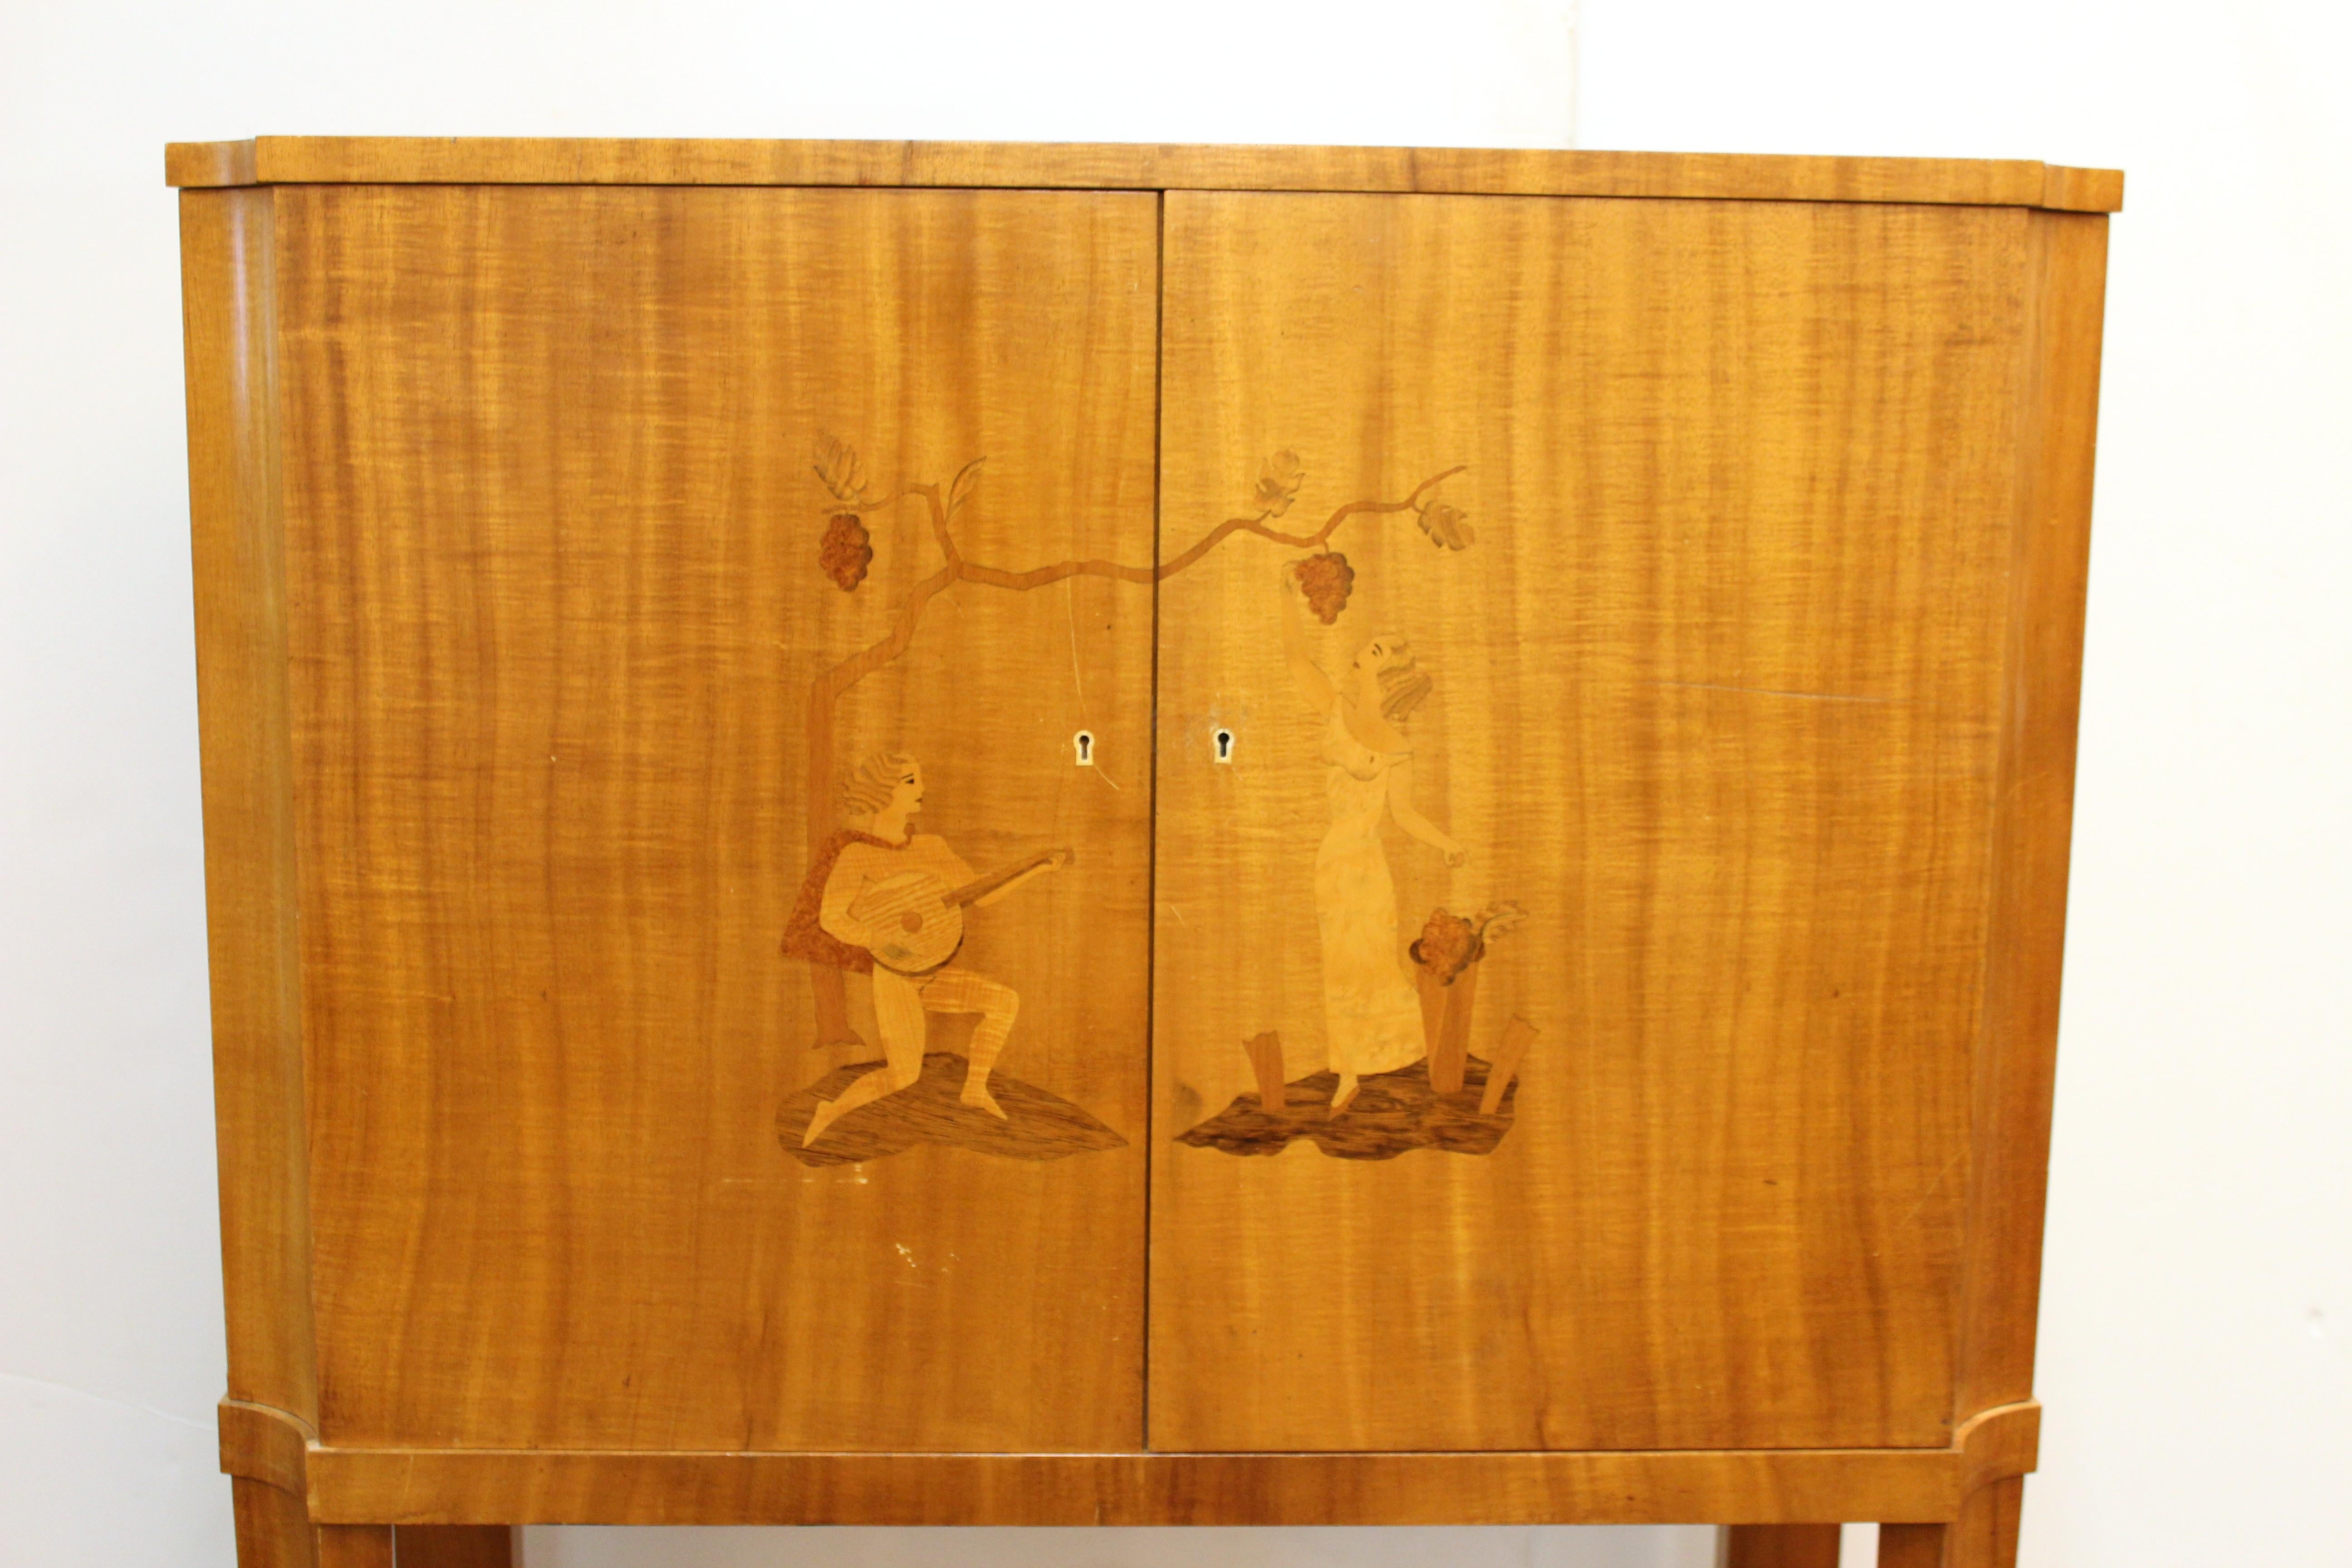 Art Deco bar cabinet from Mjolby, Sweden in blond wood with inlaid illustration. The front depicts a young couple among grape vines including a man playing an instrument and a woman reaching up to inspect grapes on a vine above. The piece opens to